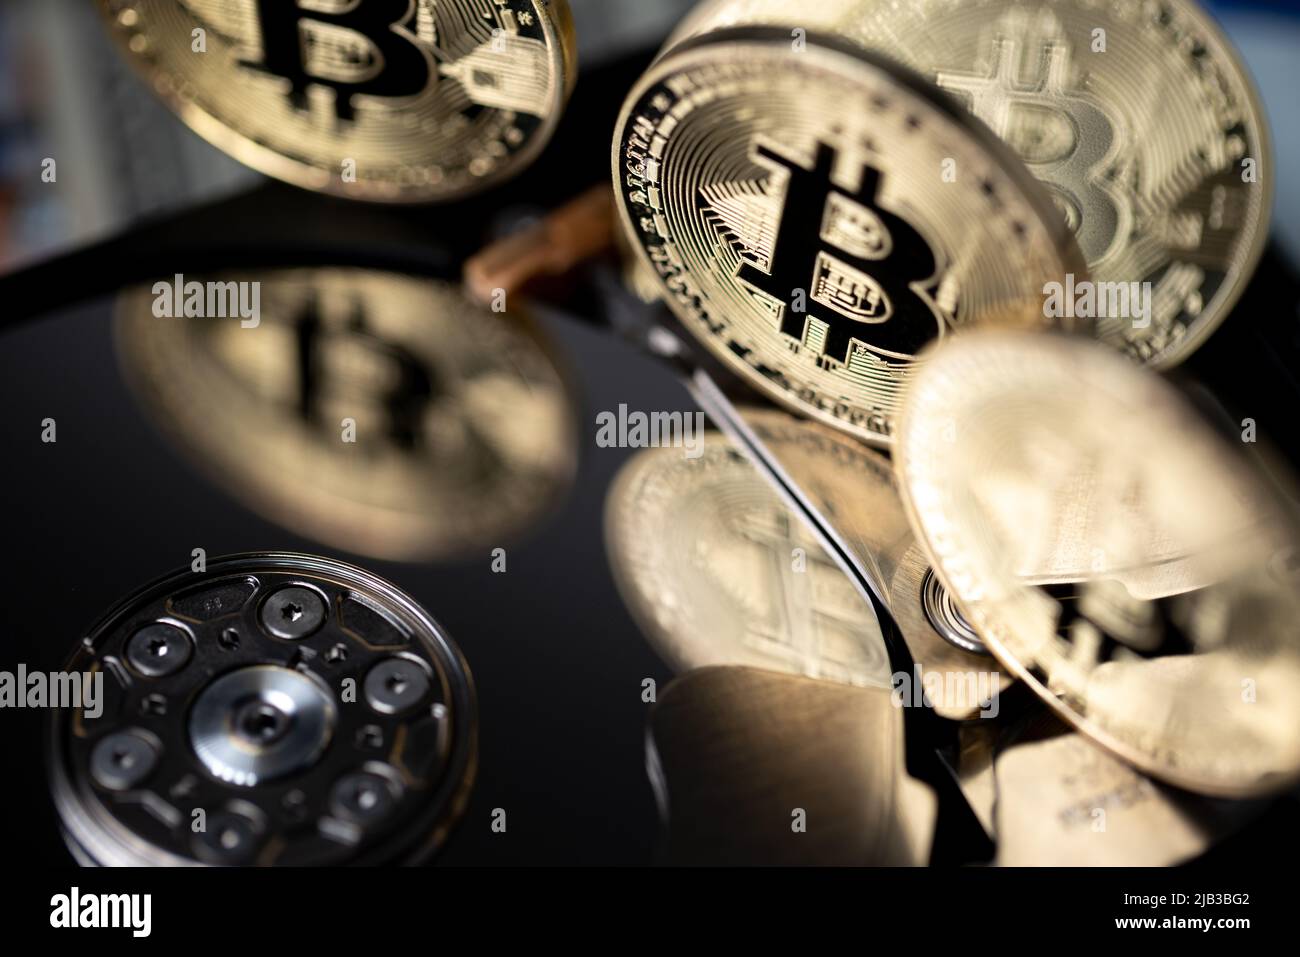 Bitcoin reflecting on HDD platter, gold BTC coins closeup view. Hard drive with crypto currency. Digital money concept Stock Photo